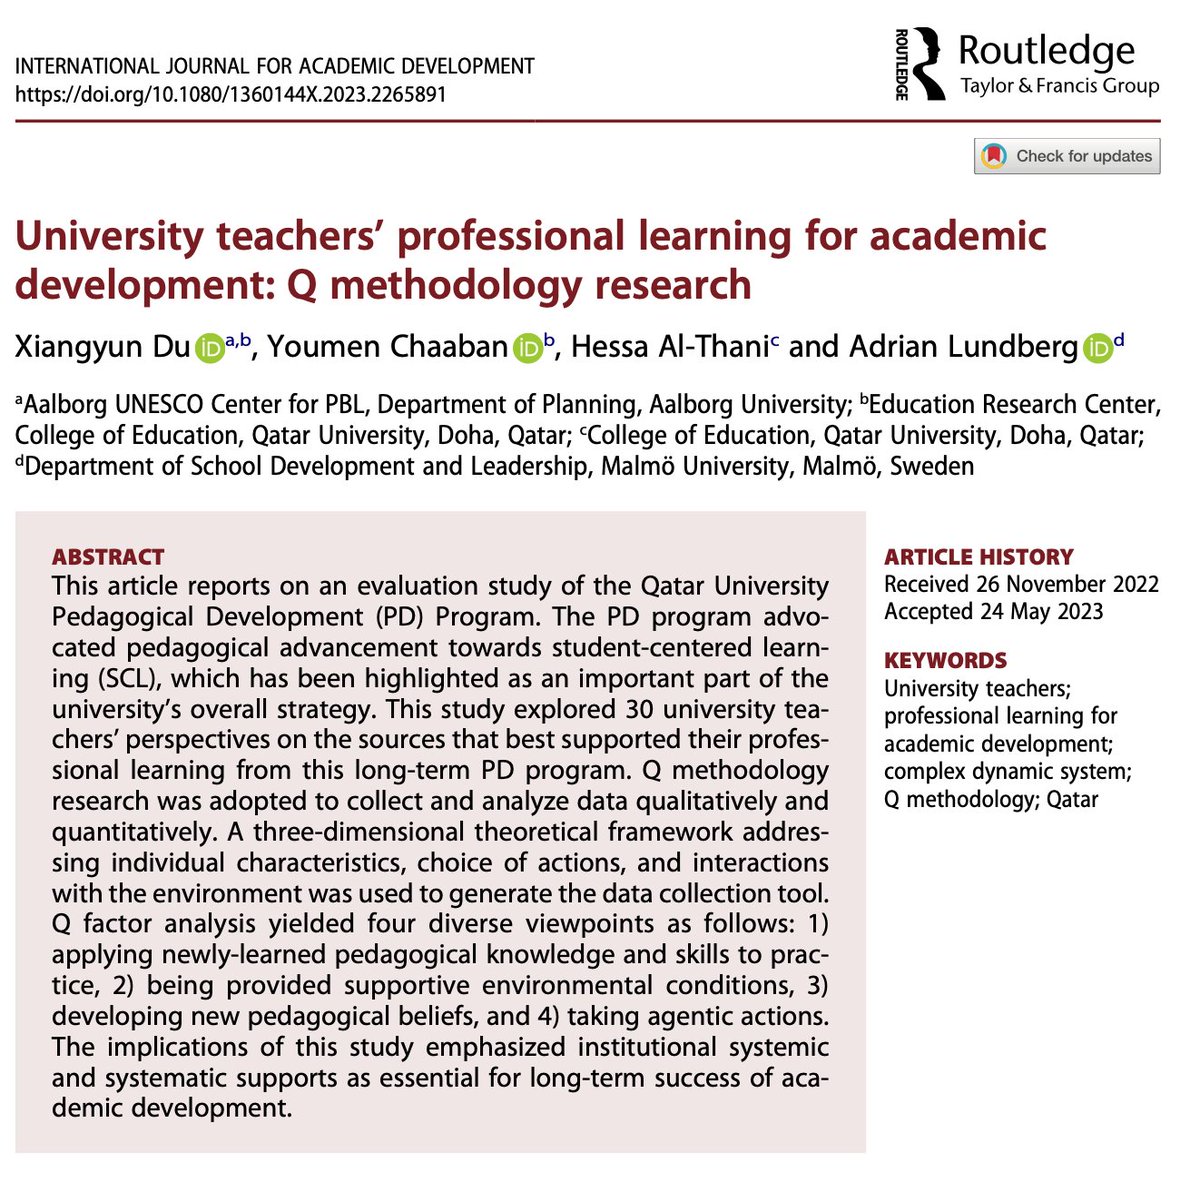 New publication from my international collaborations!

Get access to a free eprint of our new article on university teachers’ professional learning for academic development: tandfonline.com/eprint/JSRDWWY…

#academicdevelopment @malmouni @IntlJourAcadDev  #qmethodology